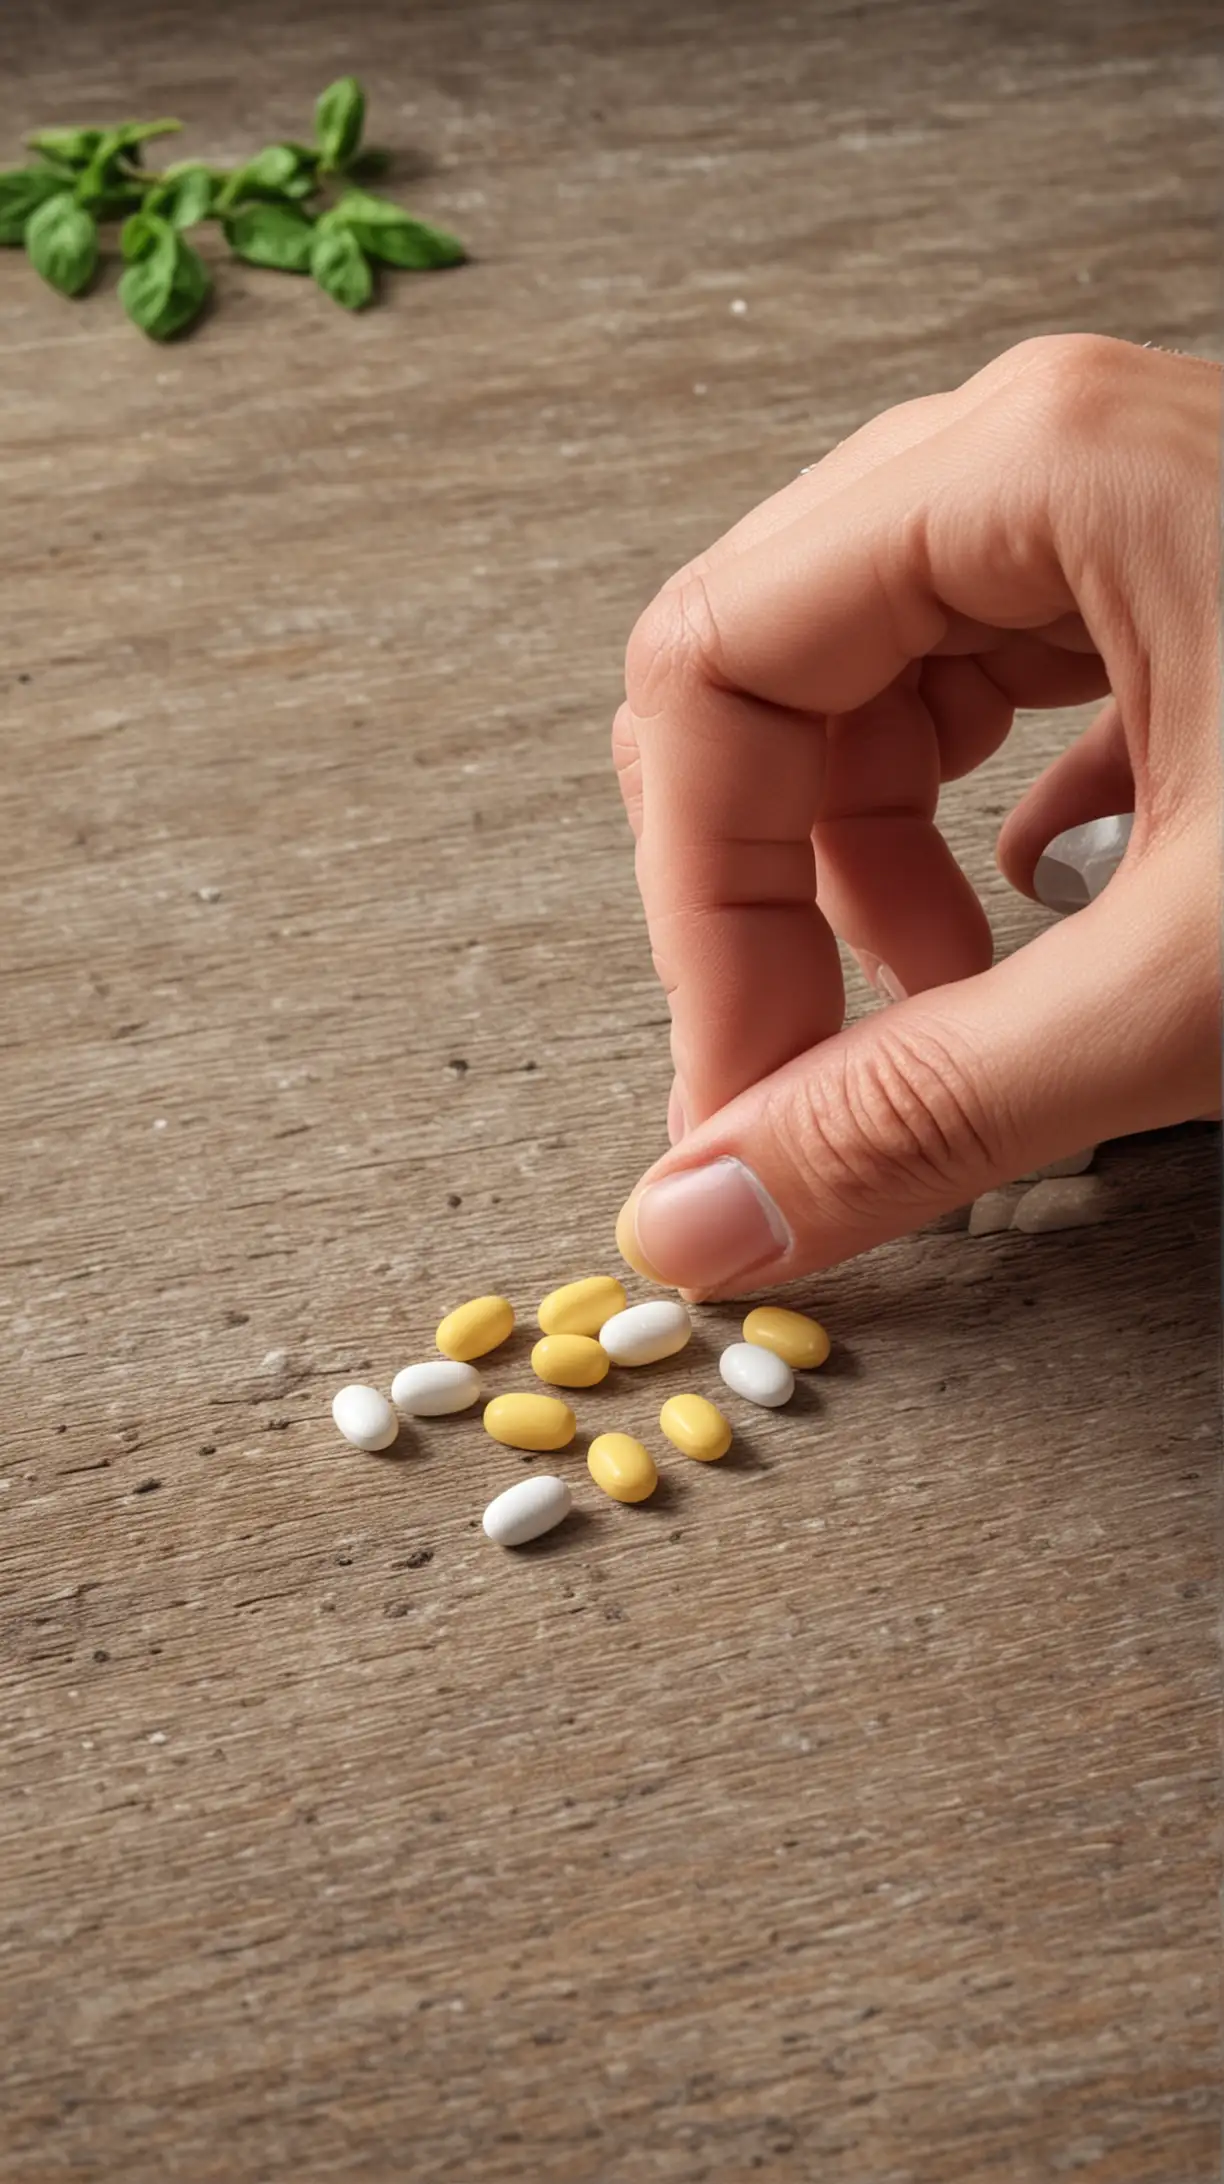 Hand Selecting Luteolin Pill from Table HyperRealistic 4K HDR Art